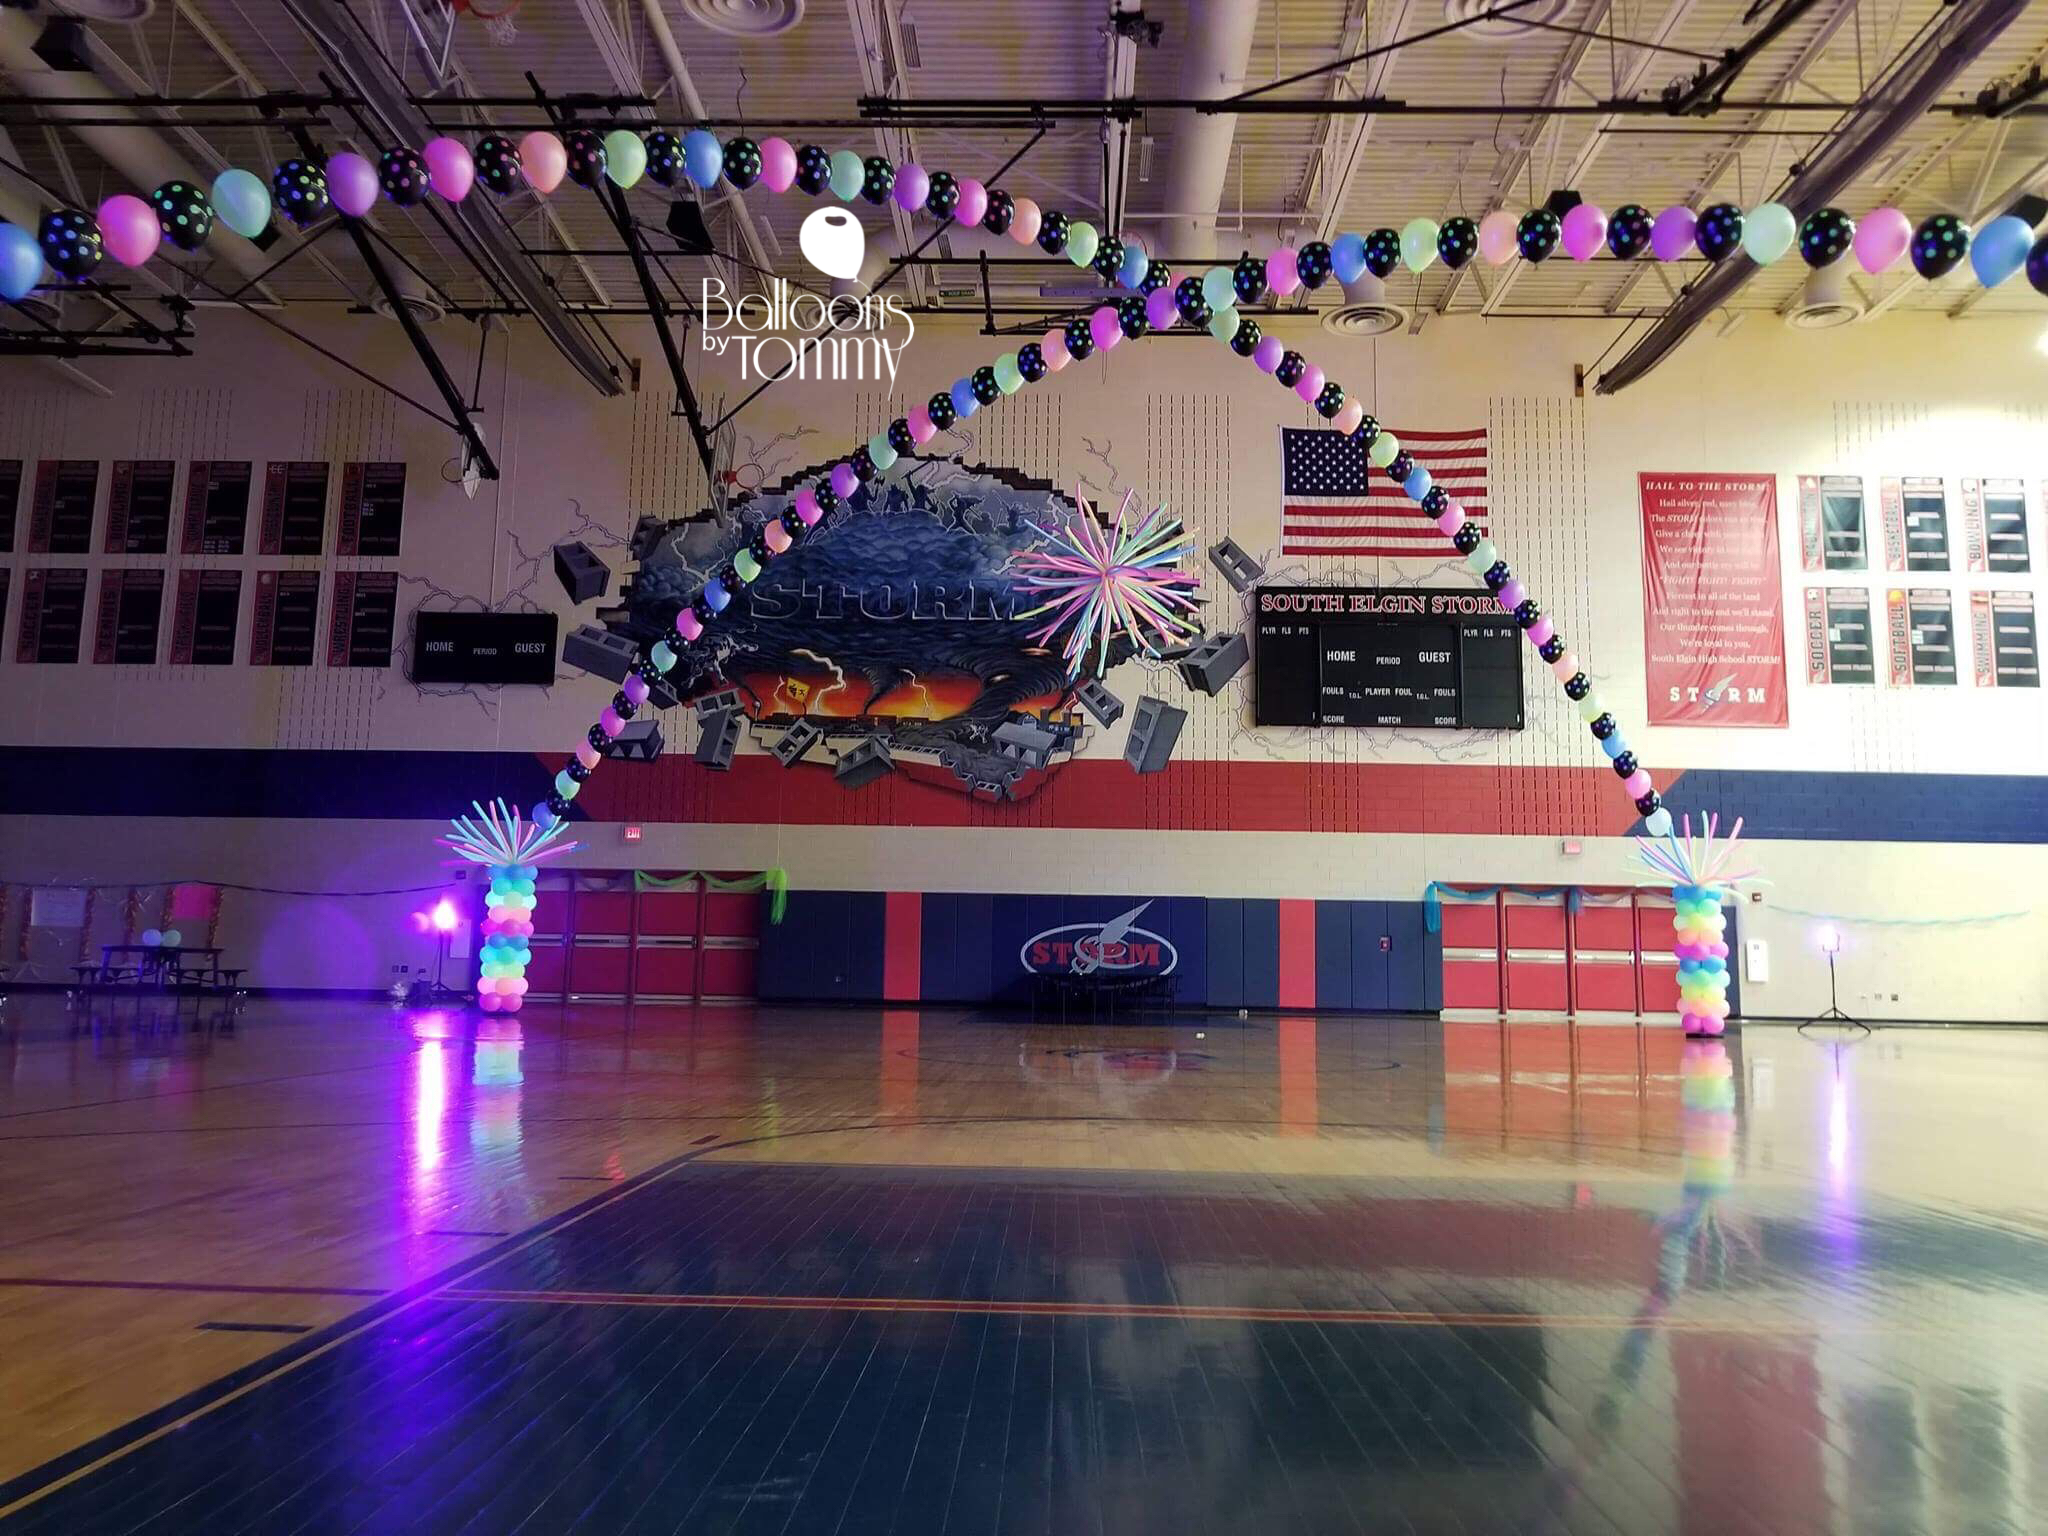 Neon Homecoming 2017 - Balloons by Tommy